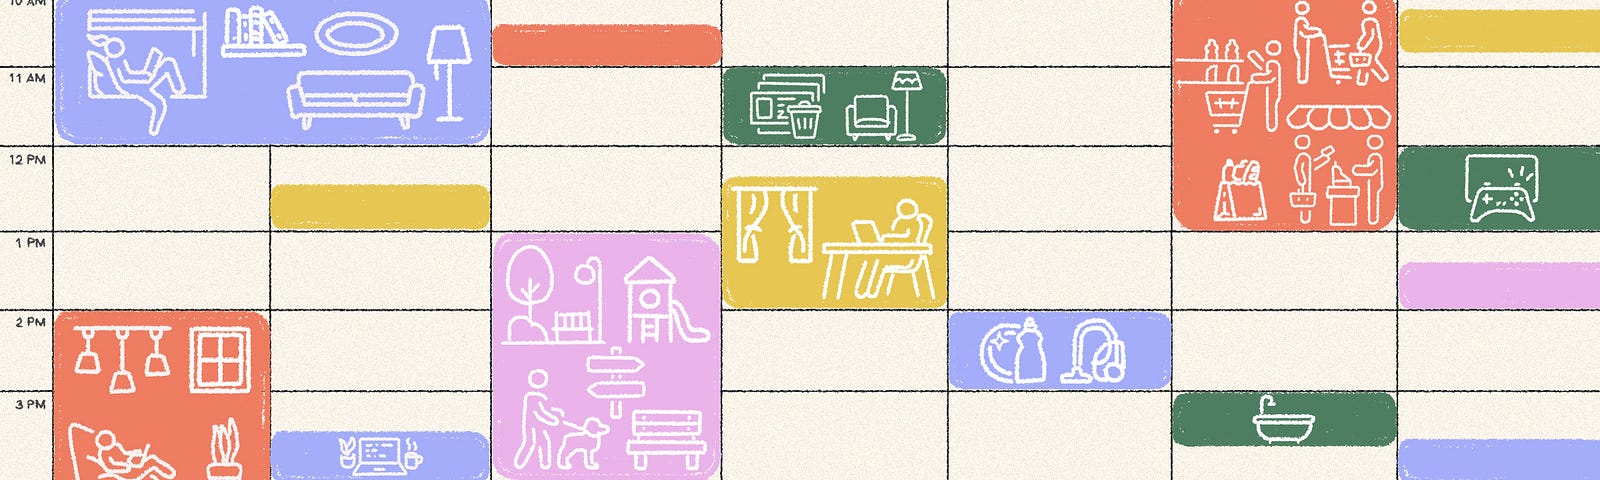 Illustration of a calendar with times blocked off with colorful images of actions/activities.